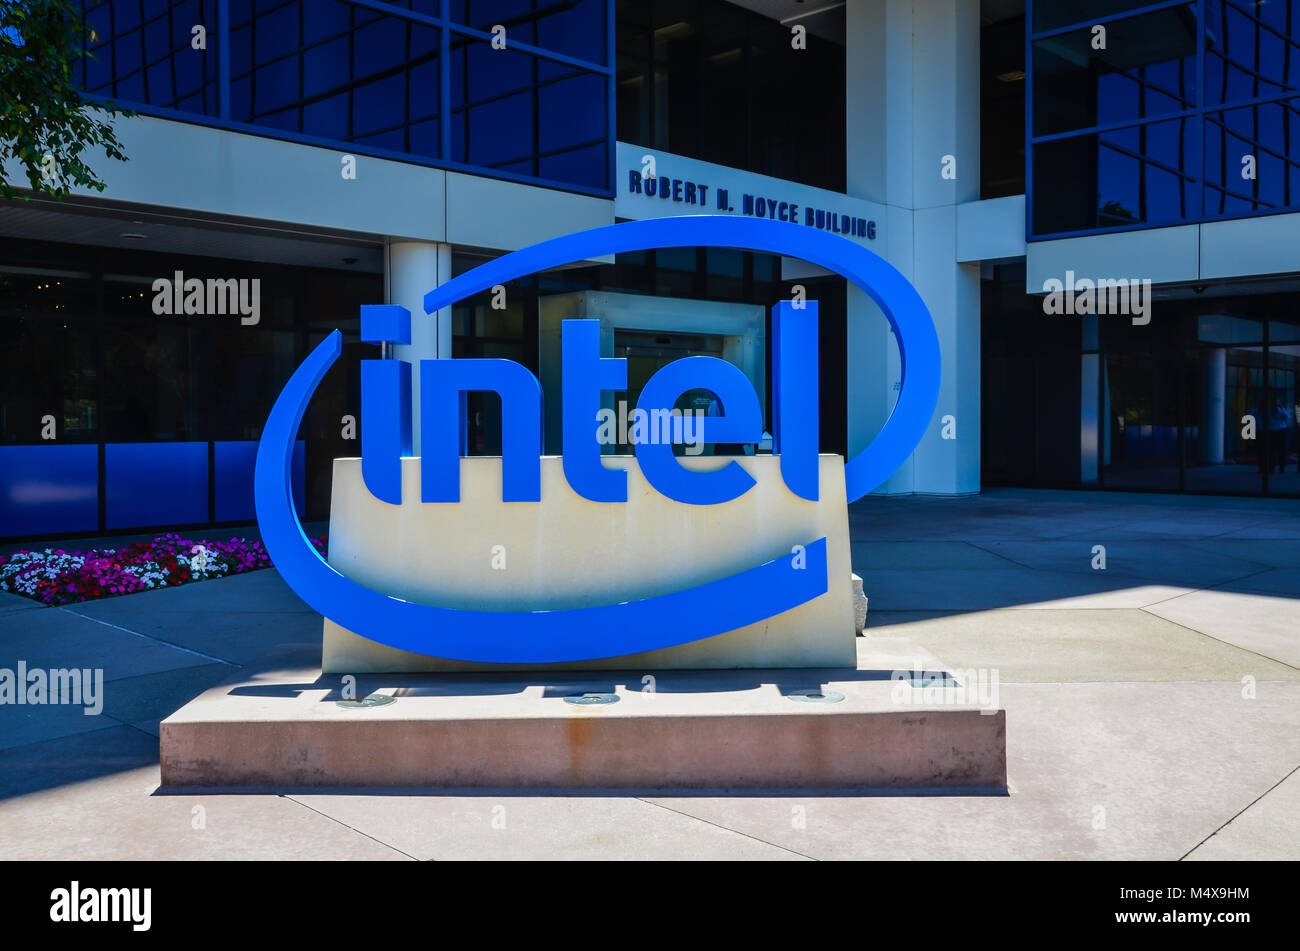 The Intel Museum located at Intel's headquarters in Santa Clara, California, has exhibits of Intel's products and history. Stock Photo